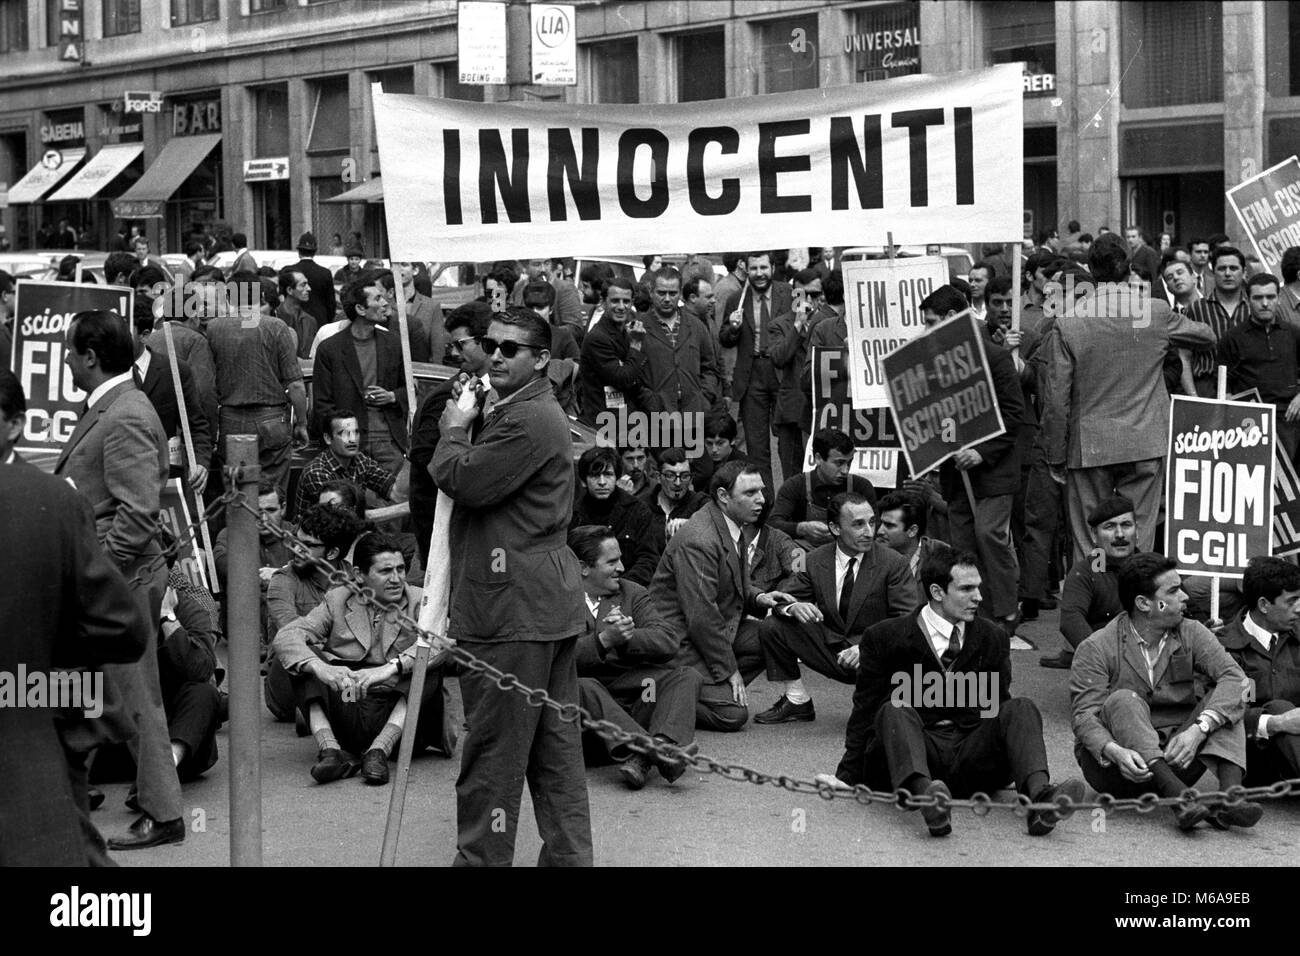 STRIKE OF THE METALMECANICAL WORKERS OF THE INNOCENTI YEAR 1968 (FOTO DE BELLIS, MILAN - 1968-09-09) ps the photo can be used respecting the context in which it was taken, and without the defamatory intent of the decoration of the people represented Stock Photo